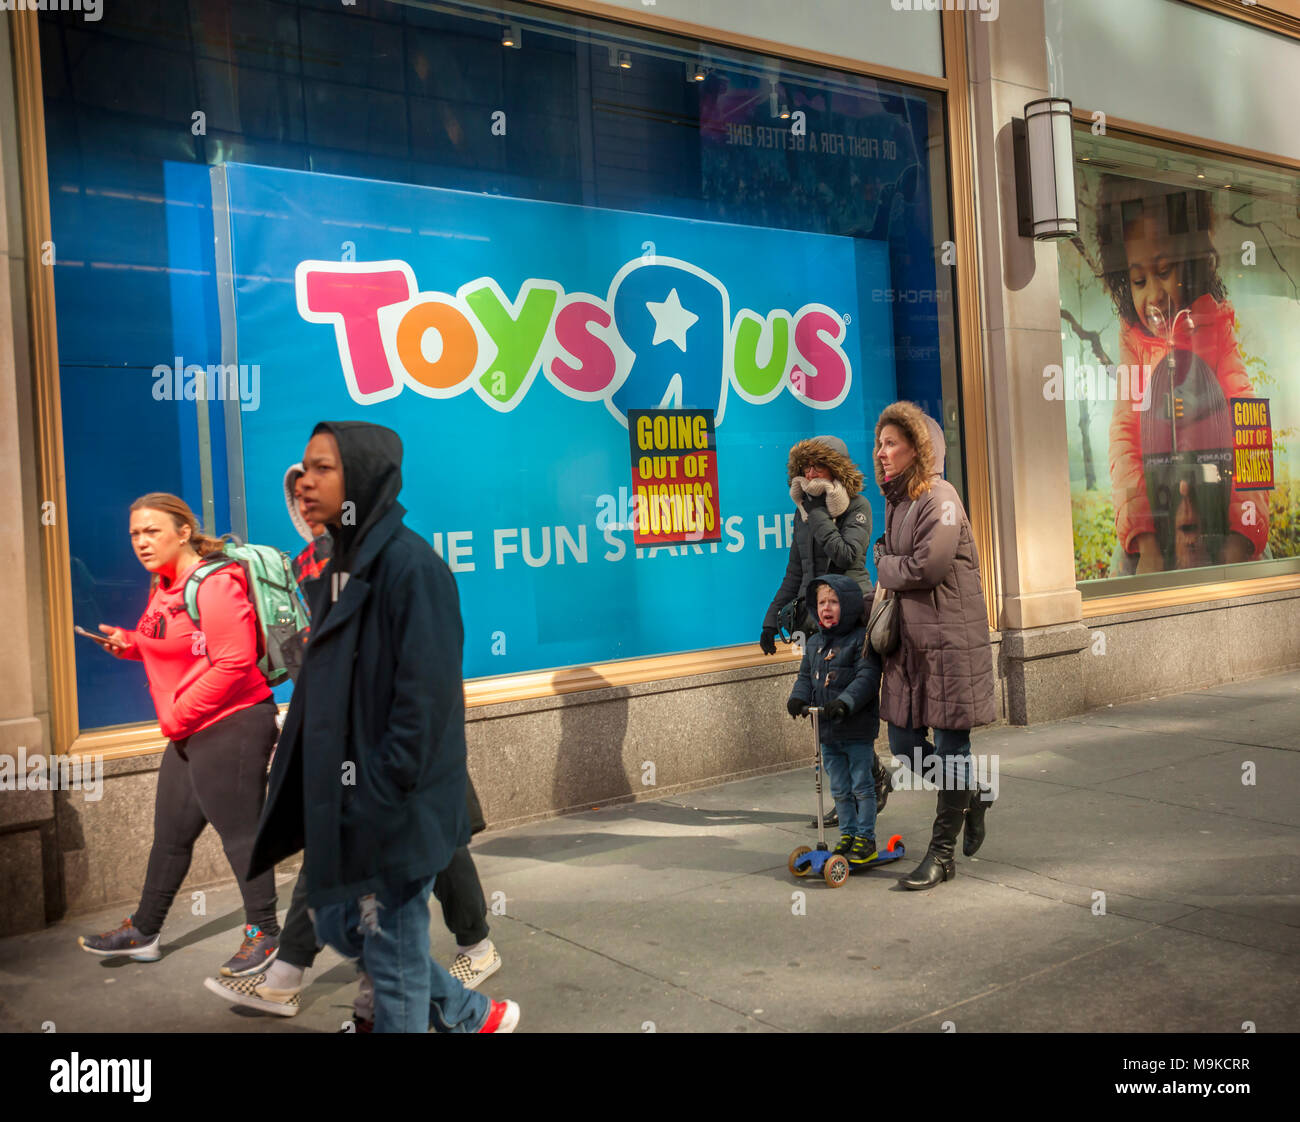 Signs posted on the window of the Toys R Us store in Times Square in New York on Friday,  March 23, 2018 announce that the store is closing and liquidation has begun. Toys R Us is liquidating and closing all 735 of its U.S. stores. The CEO of MGA Entertainment, Issac Larian, the maker of the Bratz dolls, announced a pledge of $200 million, and the creation of a GoFundMe campaign, to save approximately 400 of the 735 closing stores. (© Richard B. Levine) Stock Photo